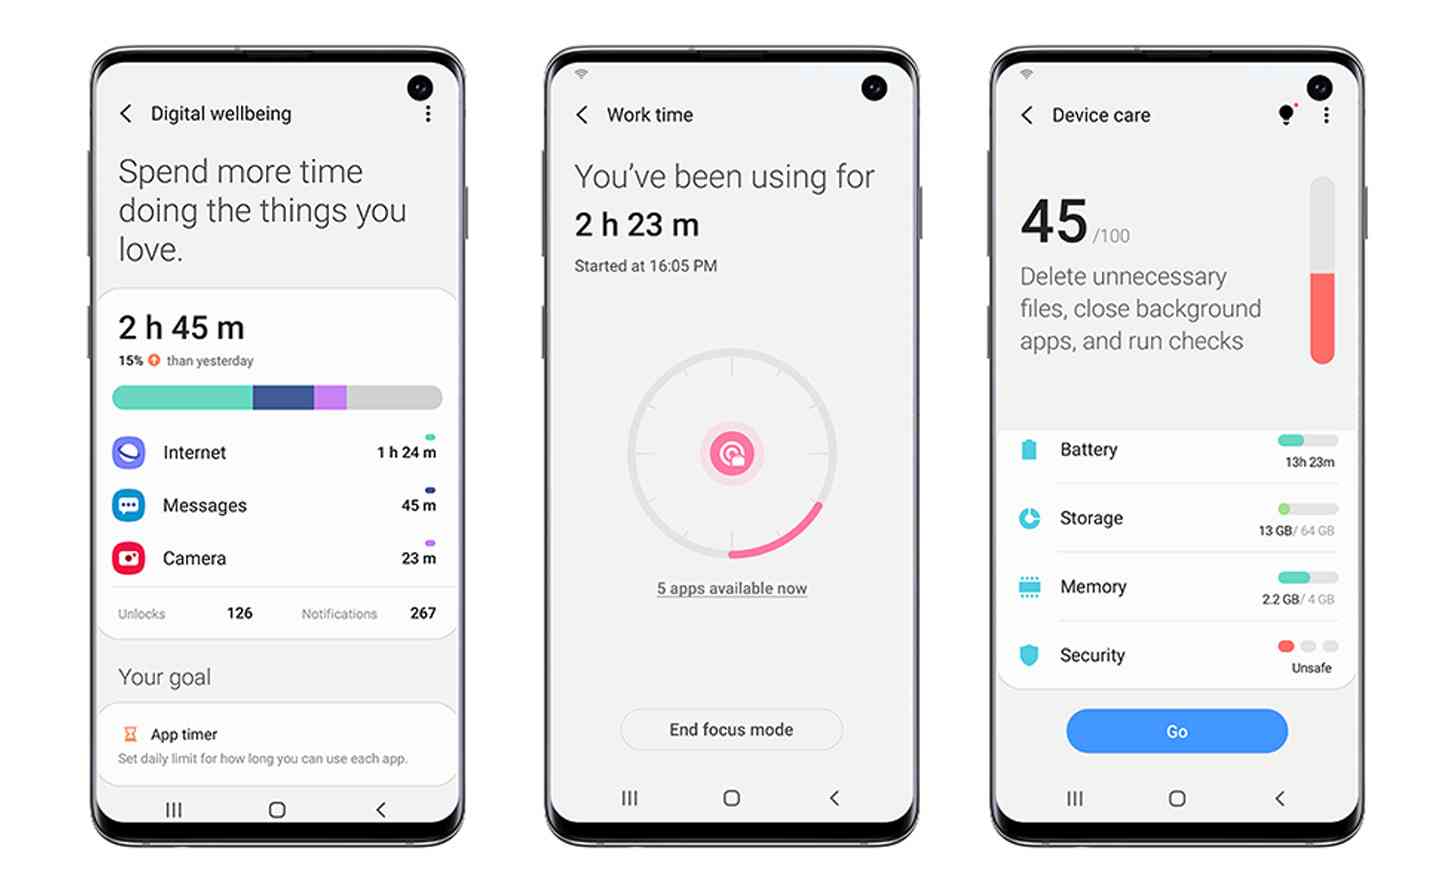 One UI 2.0 Android 10 digital wellbeing